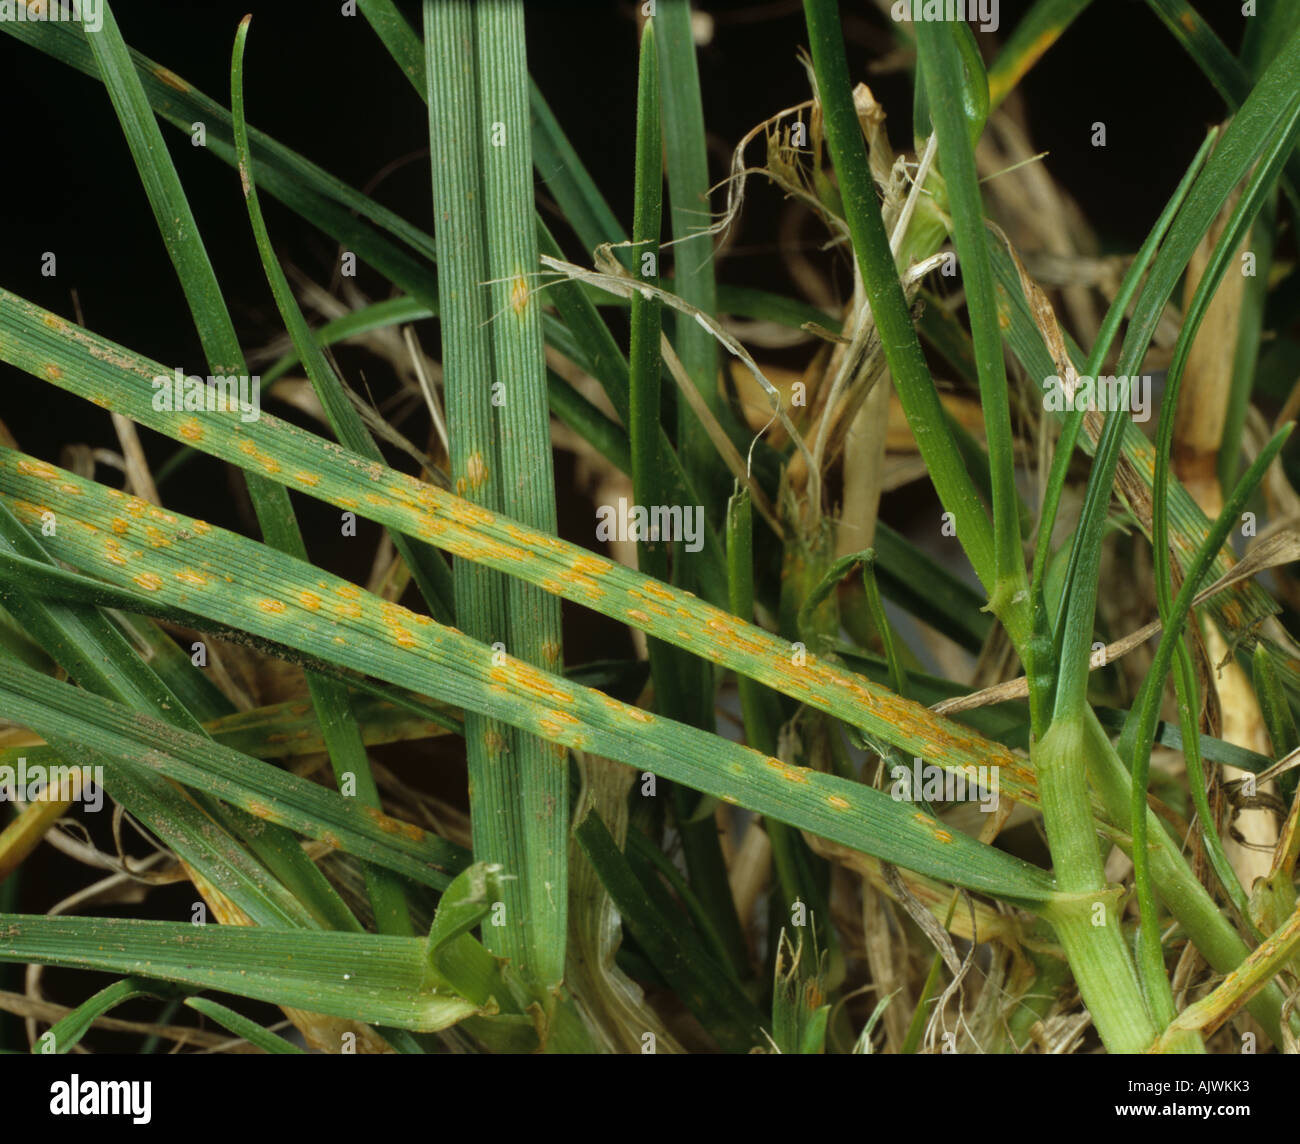 Crown rust Puccinia coronata leaf infection on meadow grass Poa sp Stock Photo